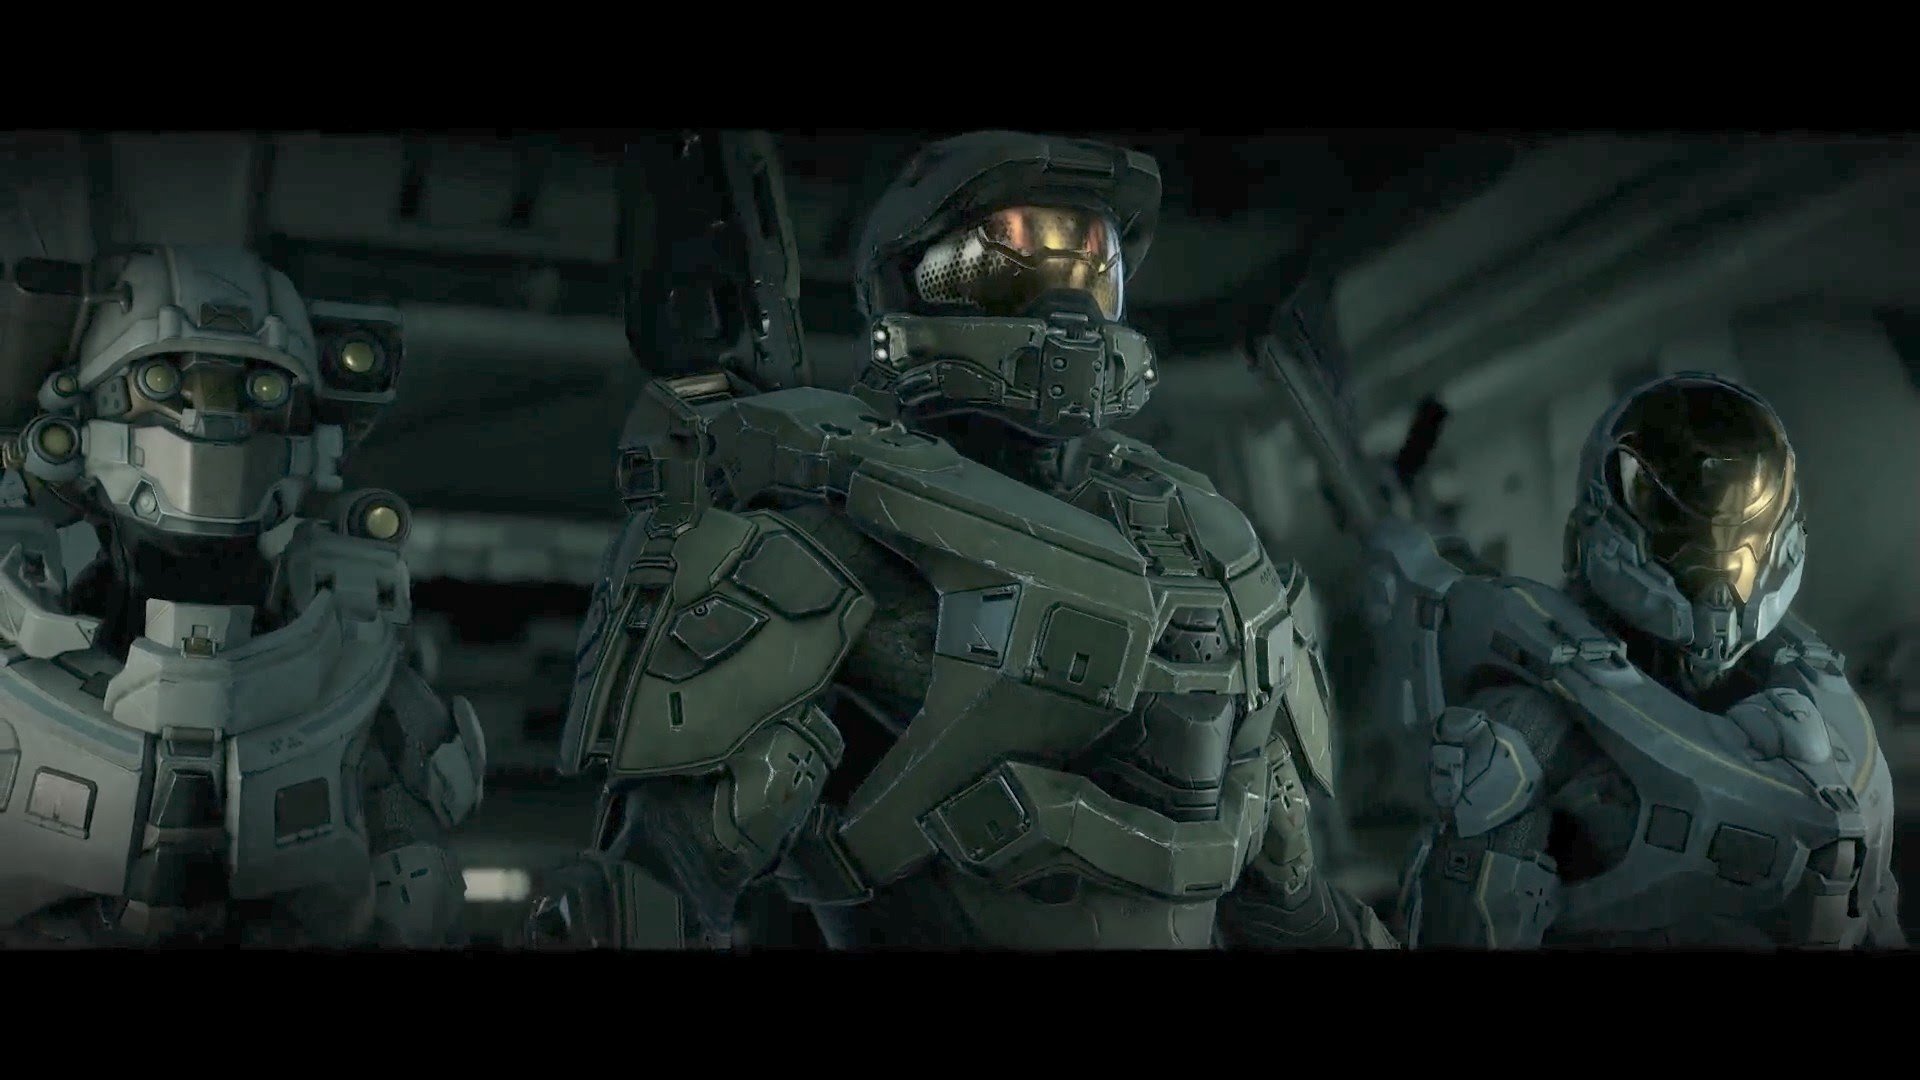 1920x1080 Halo 5 - Master Chief's Blue Team Opening Cinematic Trailer (Xbox One) -  YouTube